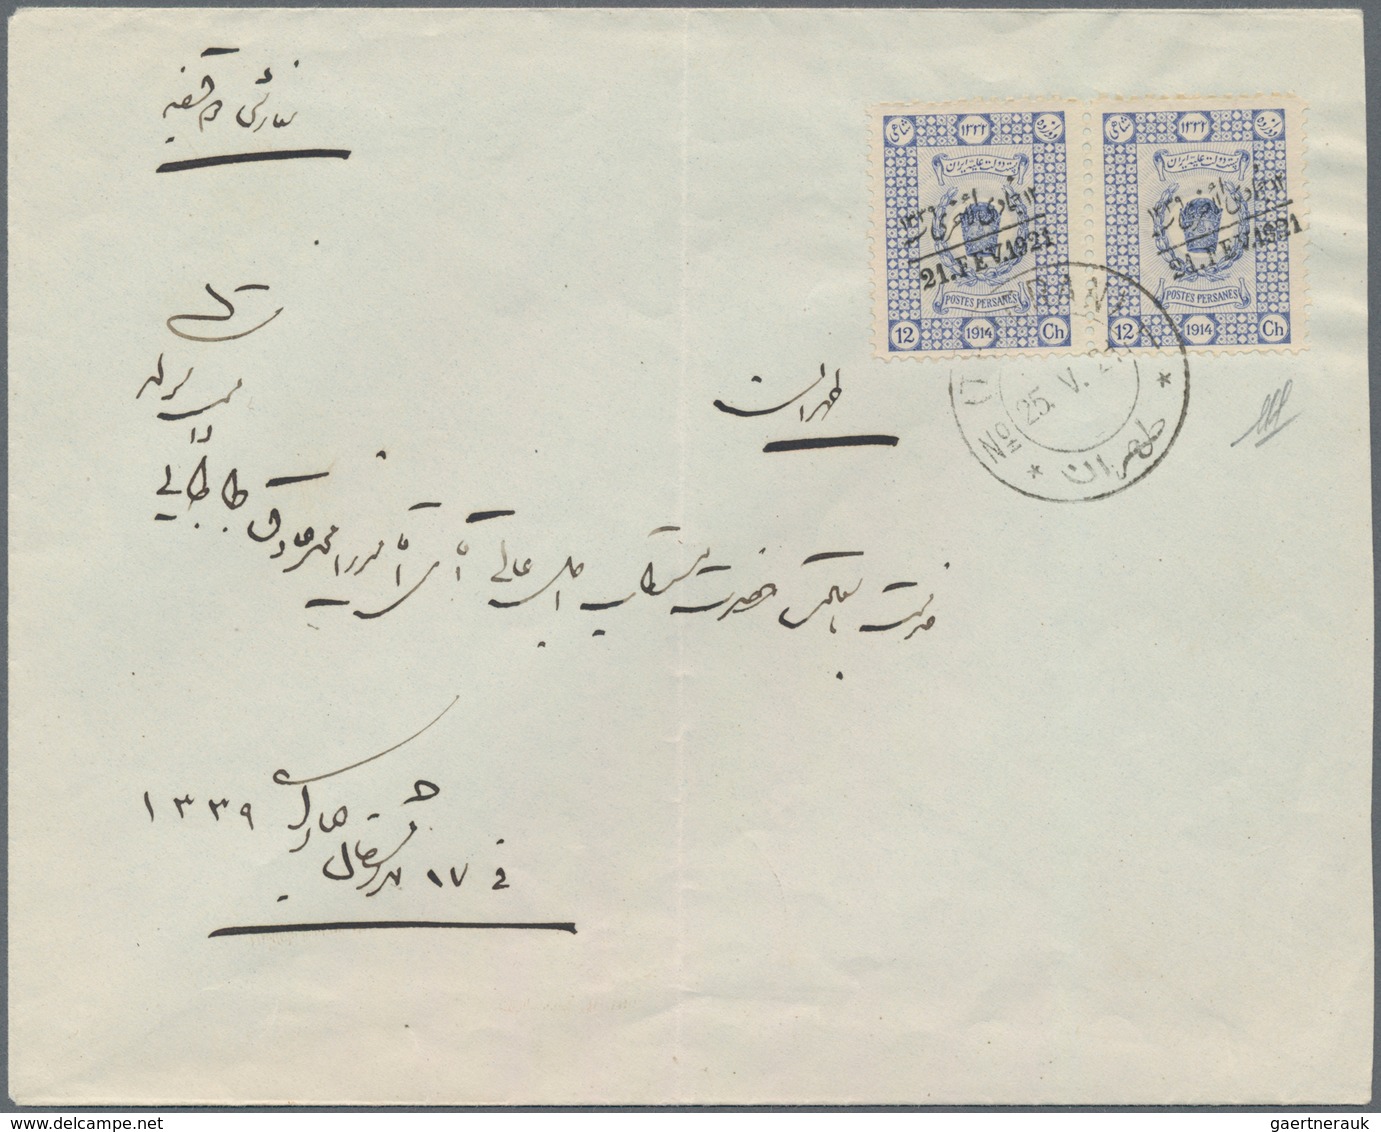 Iran: 1921, Cover With Imprint Issue "21 FEV 1921" Pair 12 Ch. Ultramarine Tied By "Teheran 25/V.21" - Iran